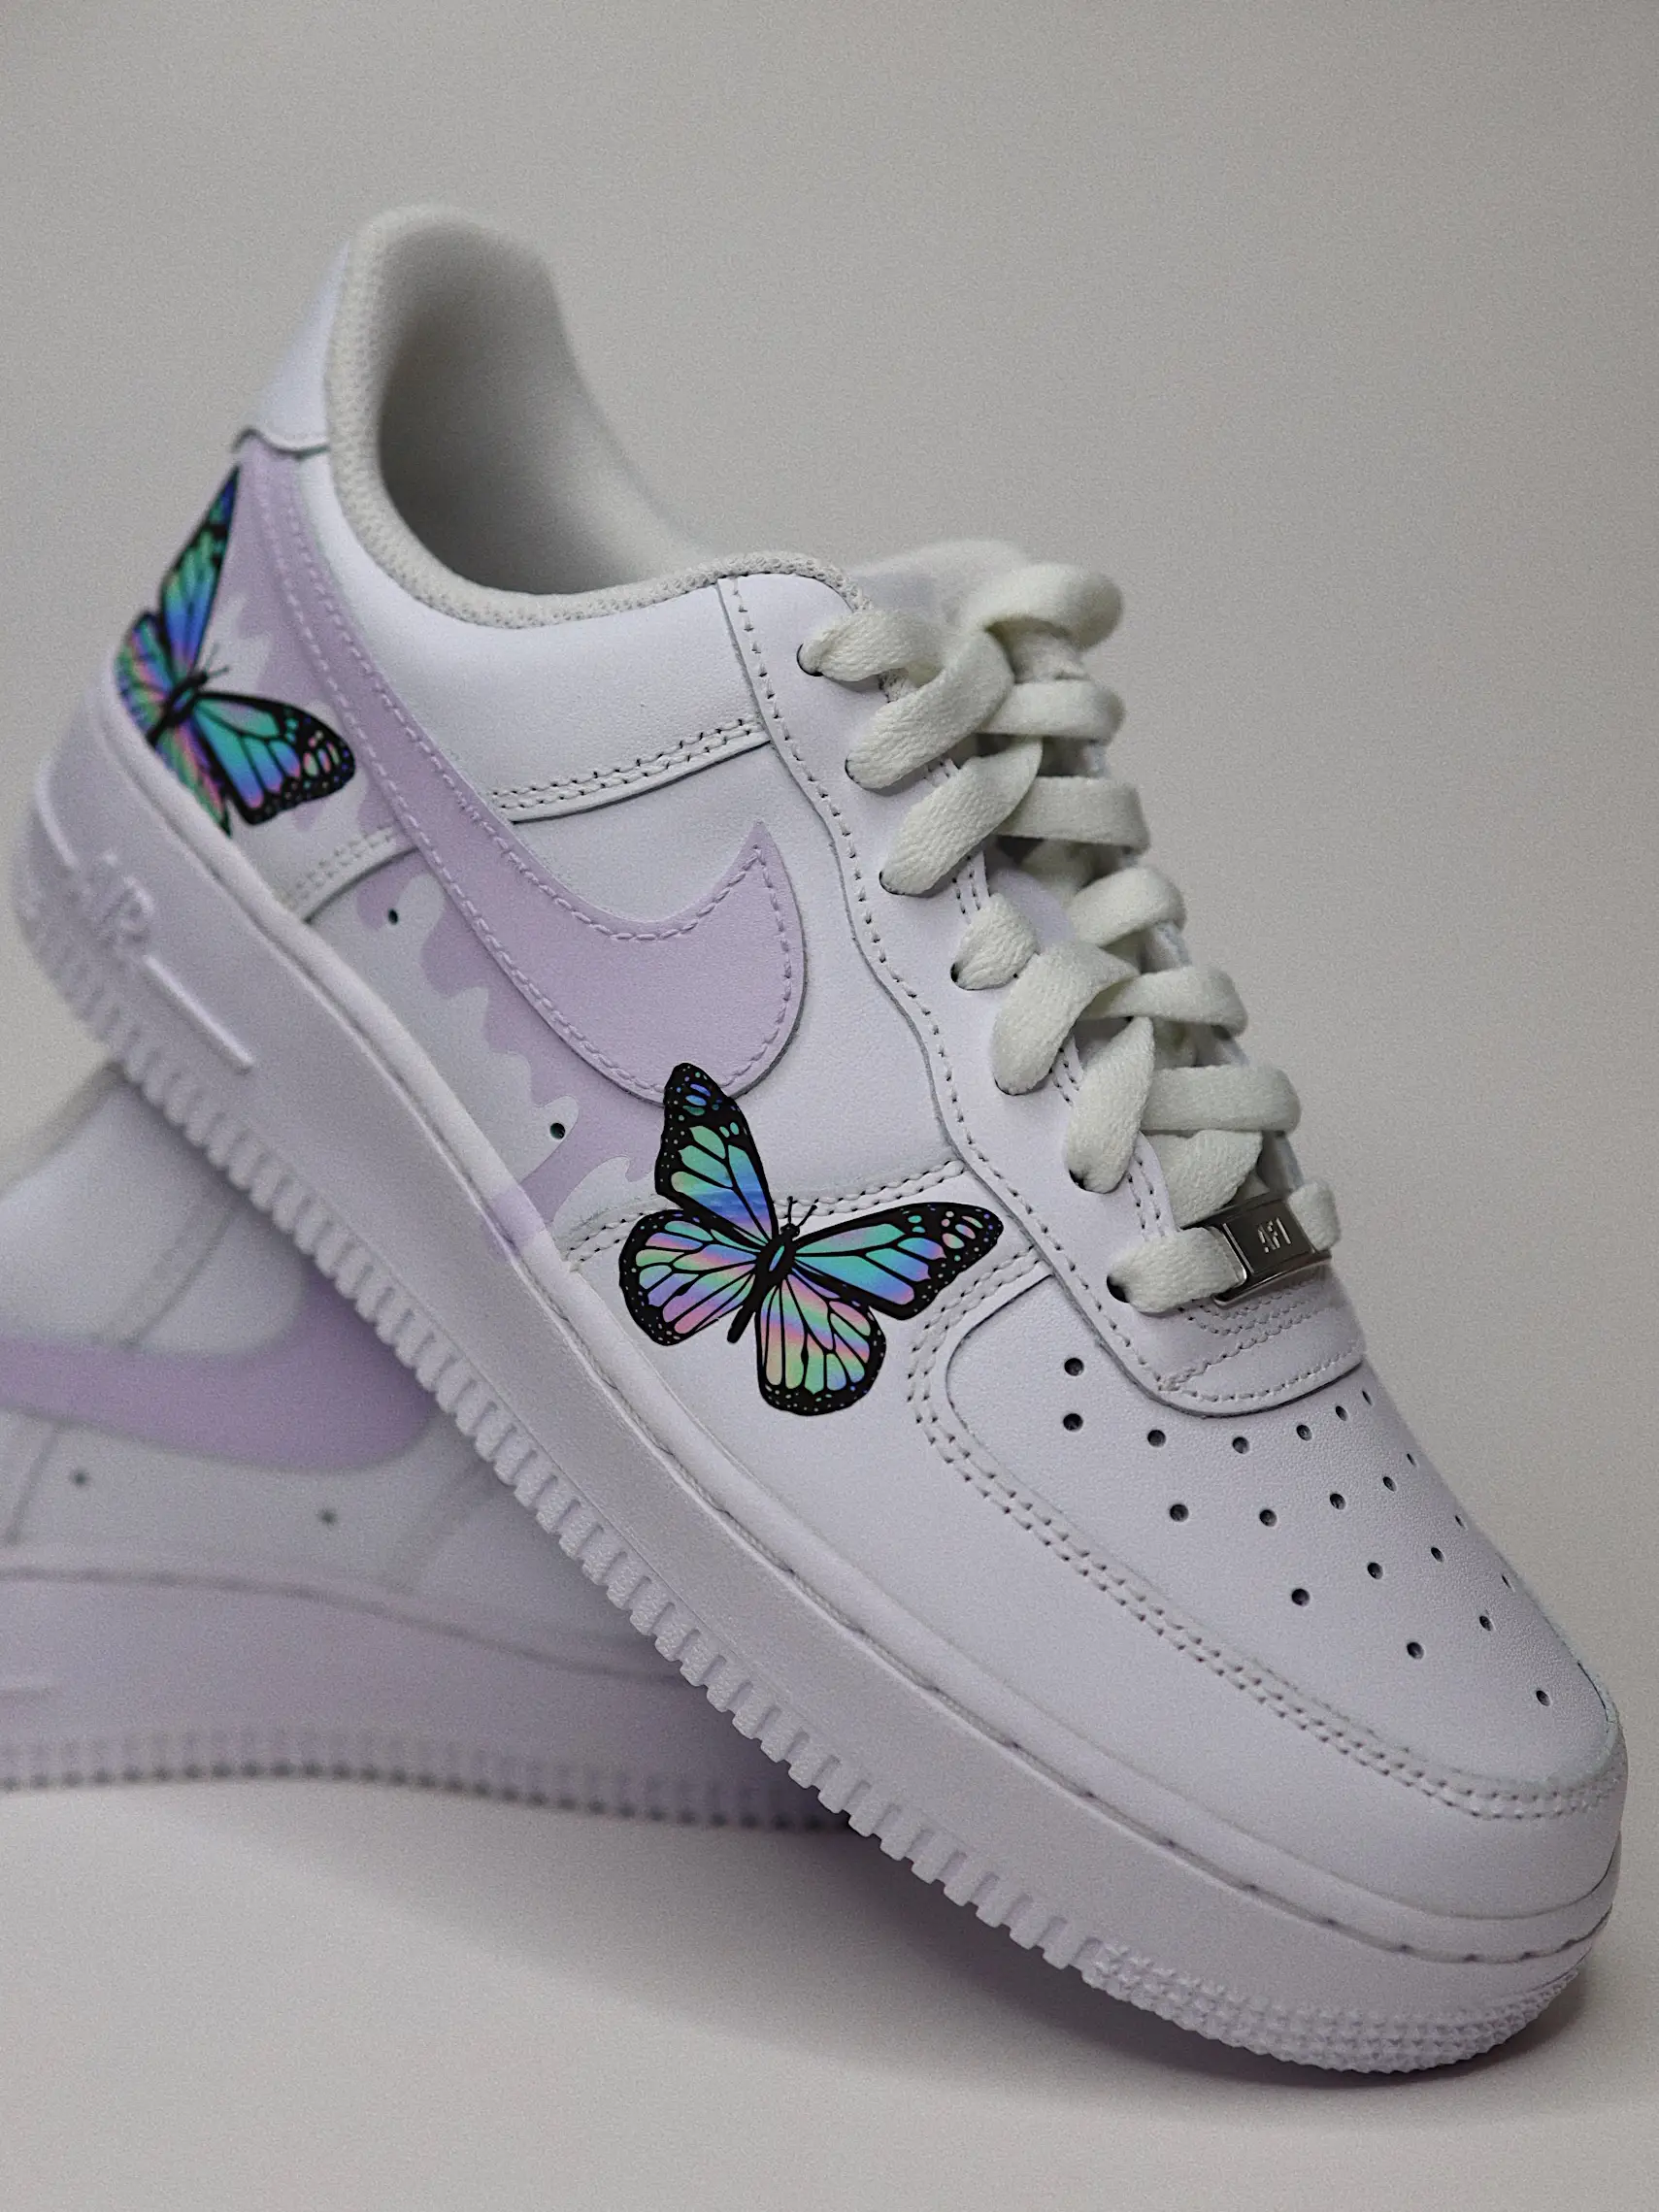 NIKE AIR FORCE 1 - BUTTERFLY WITH DRIP #cool #designs #to #paint #on #shoes  #cooldesignstopaintonshoes NIKE…